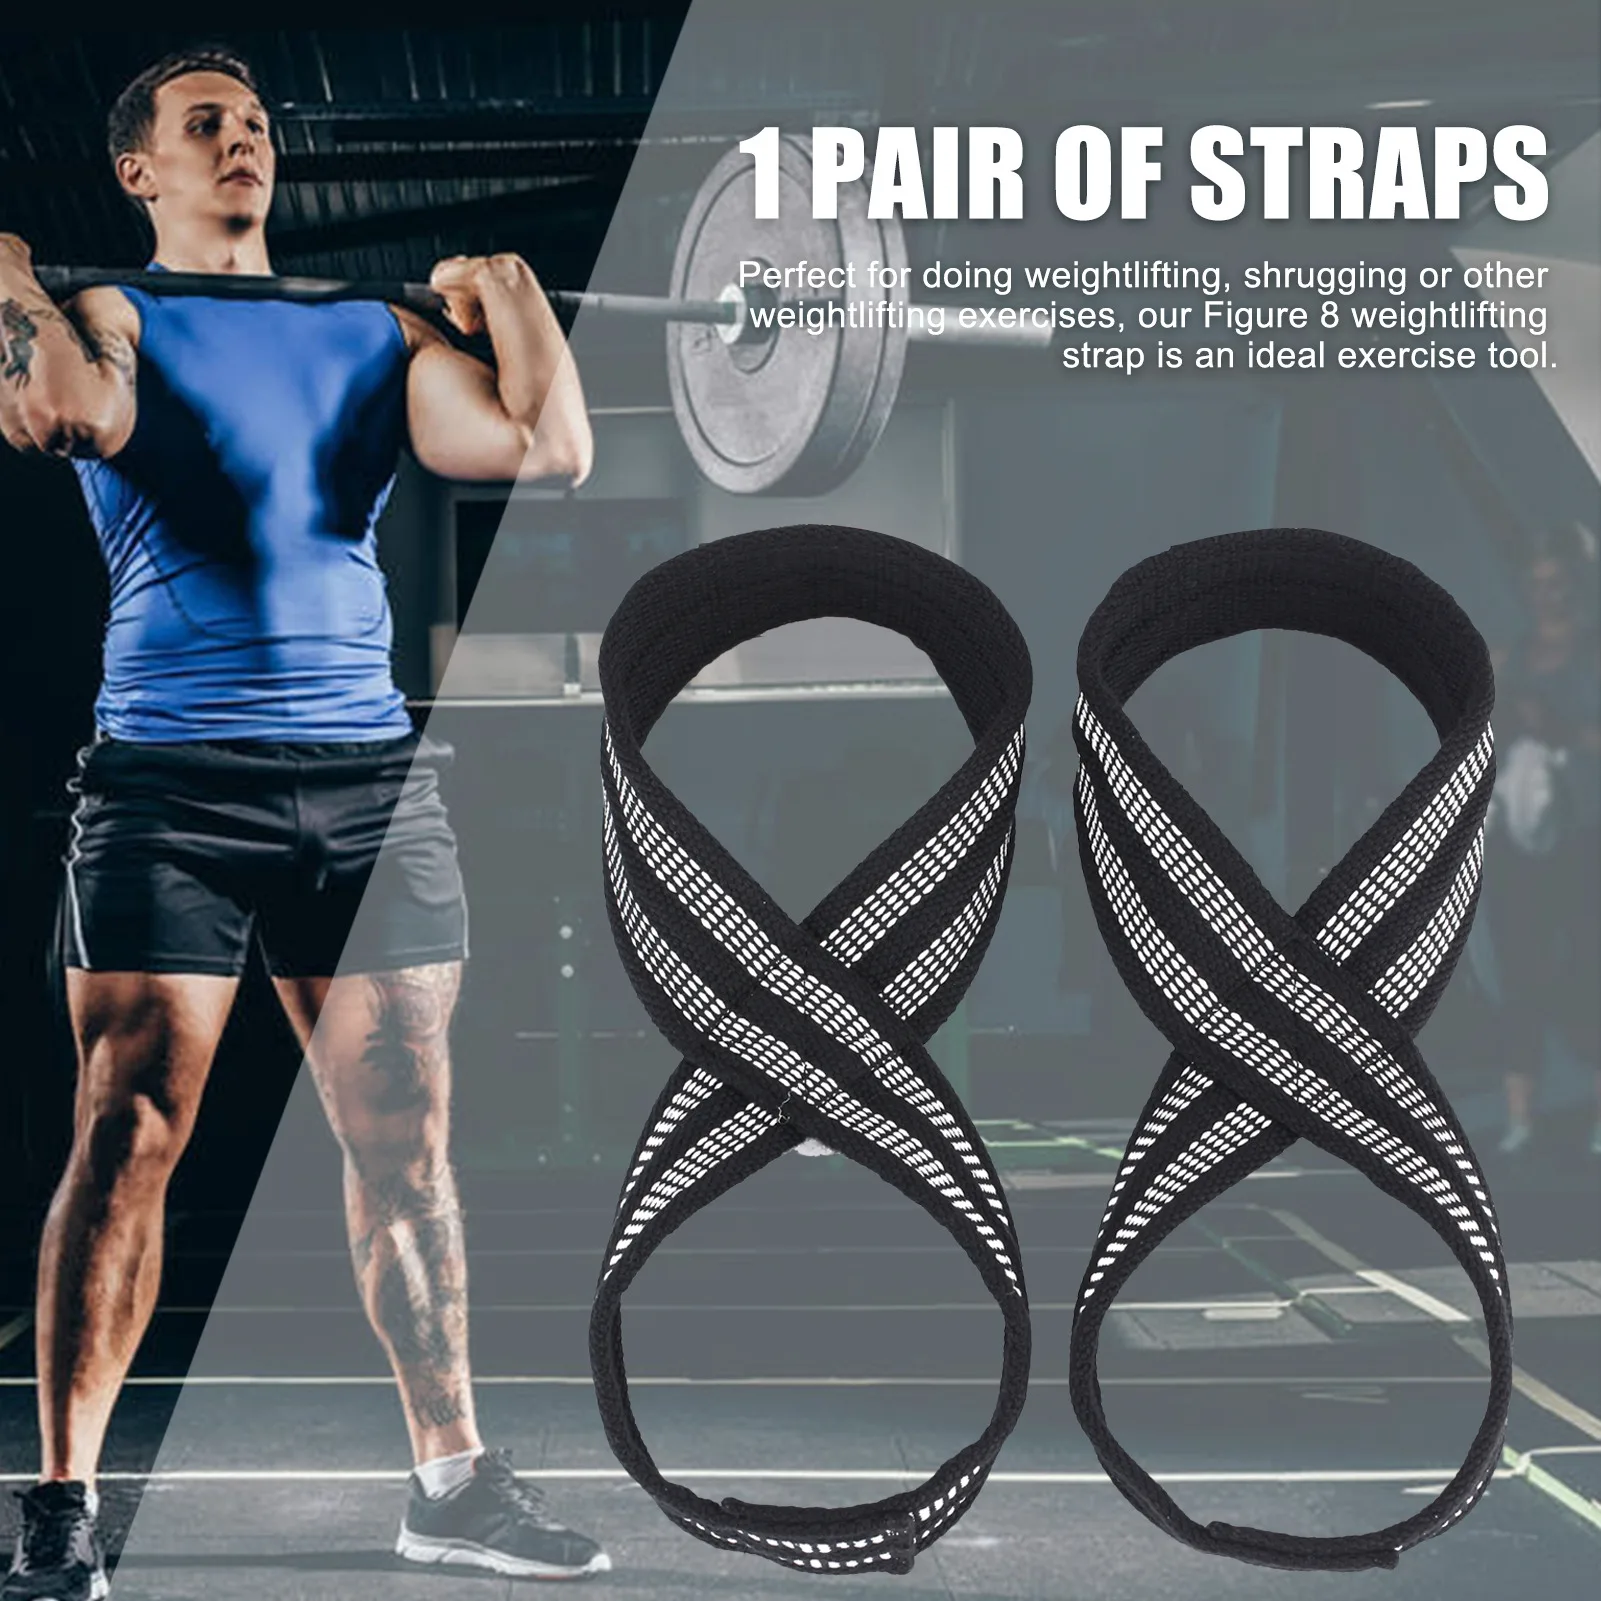 

Deadlift Straps 8 Figure Lifting Straps For Weightlifters Gym Gym Equipment Pull Up Bar Gimnasio Fitness Gloves Guantes Gym